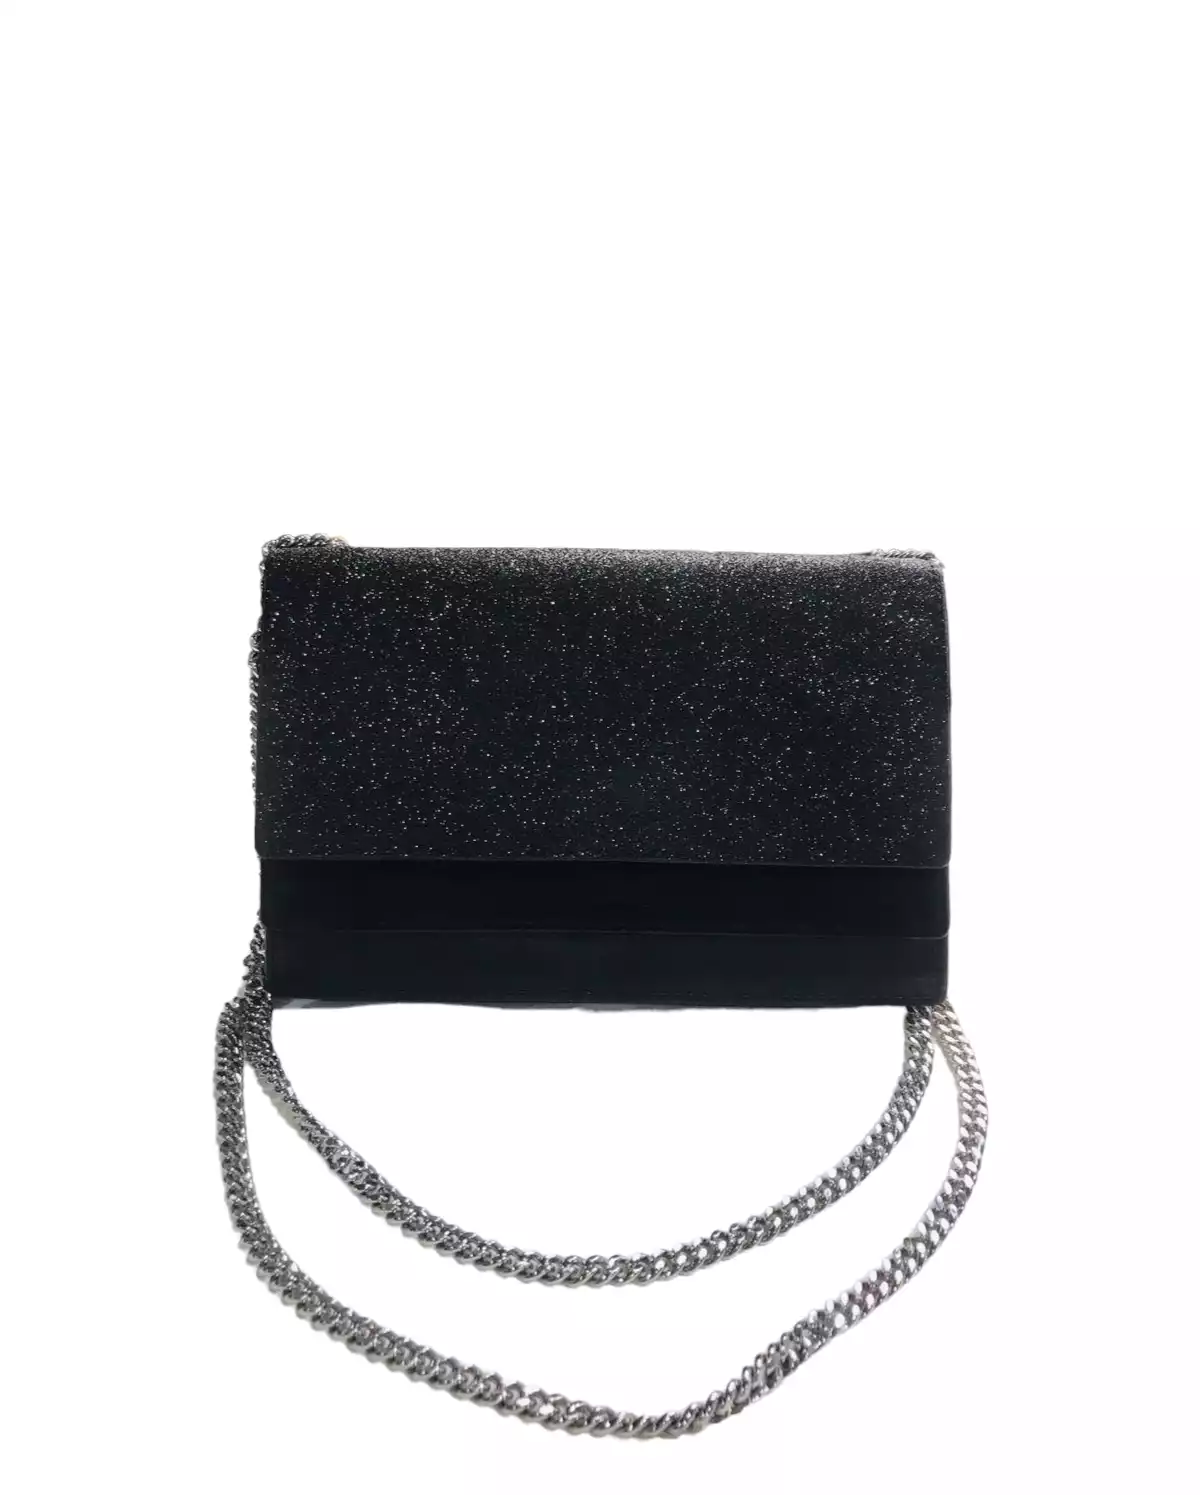 Sling Bag by All Saints